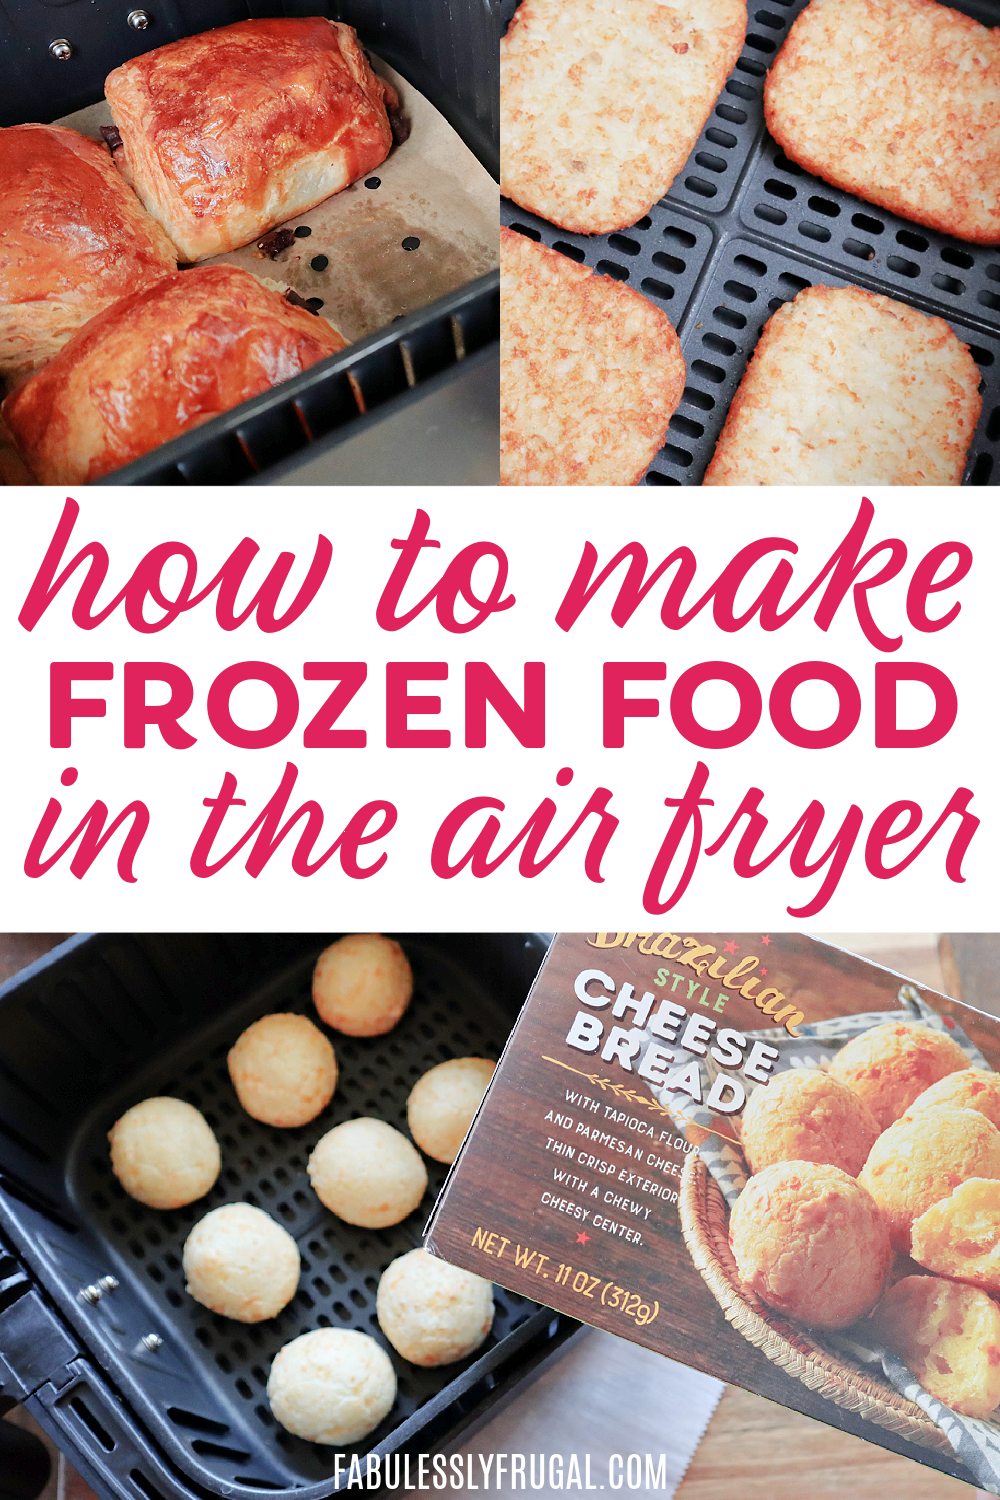 I tried Trader Joe's best frozen foods in the air fryer and it was easy and amazing! Yes, you can use your air fryer for warming up food.